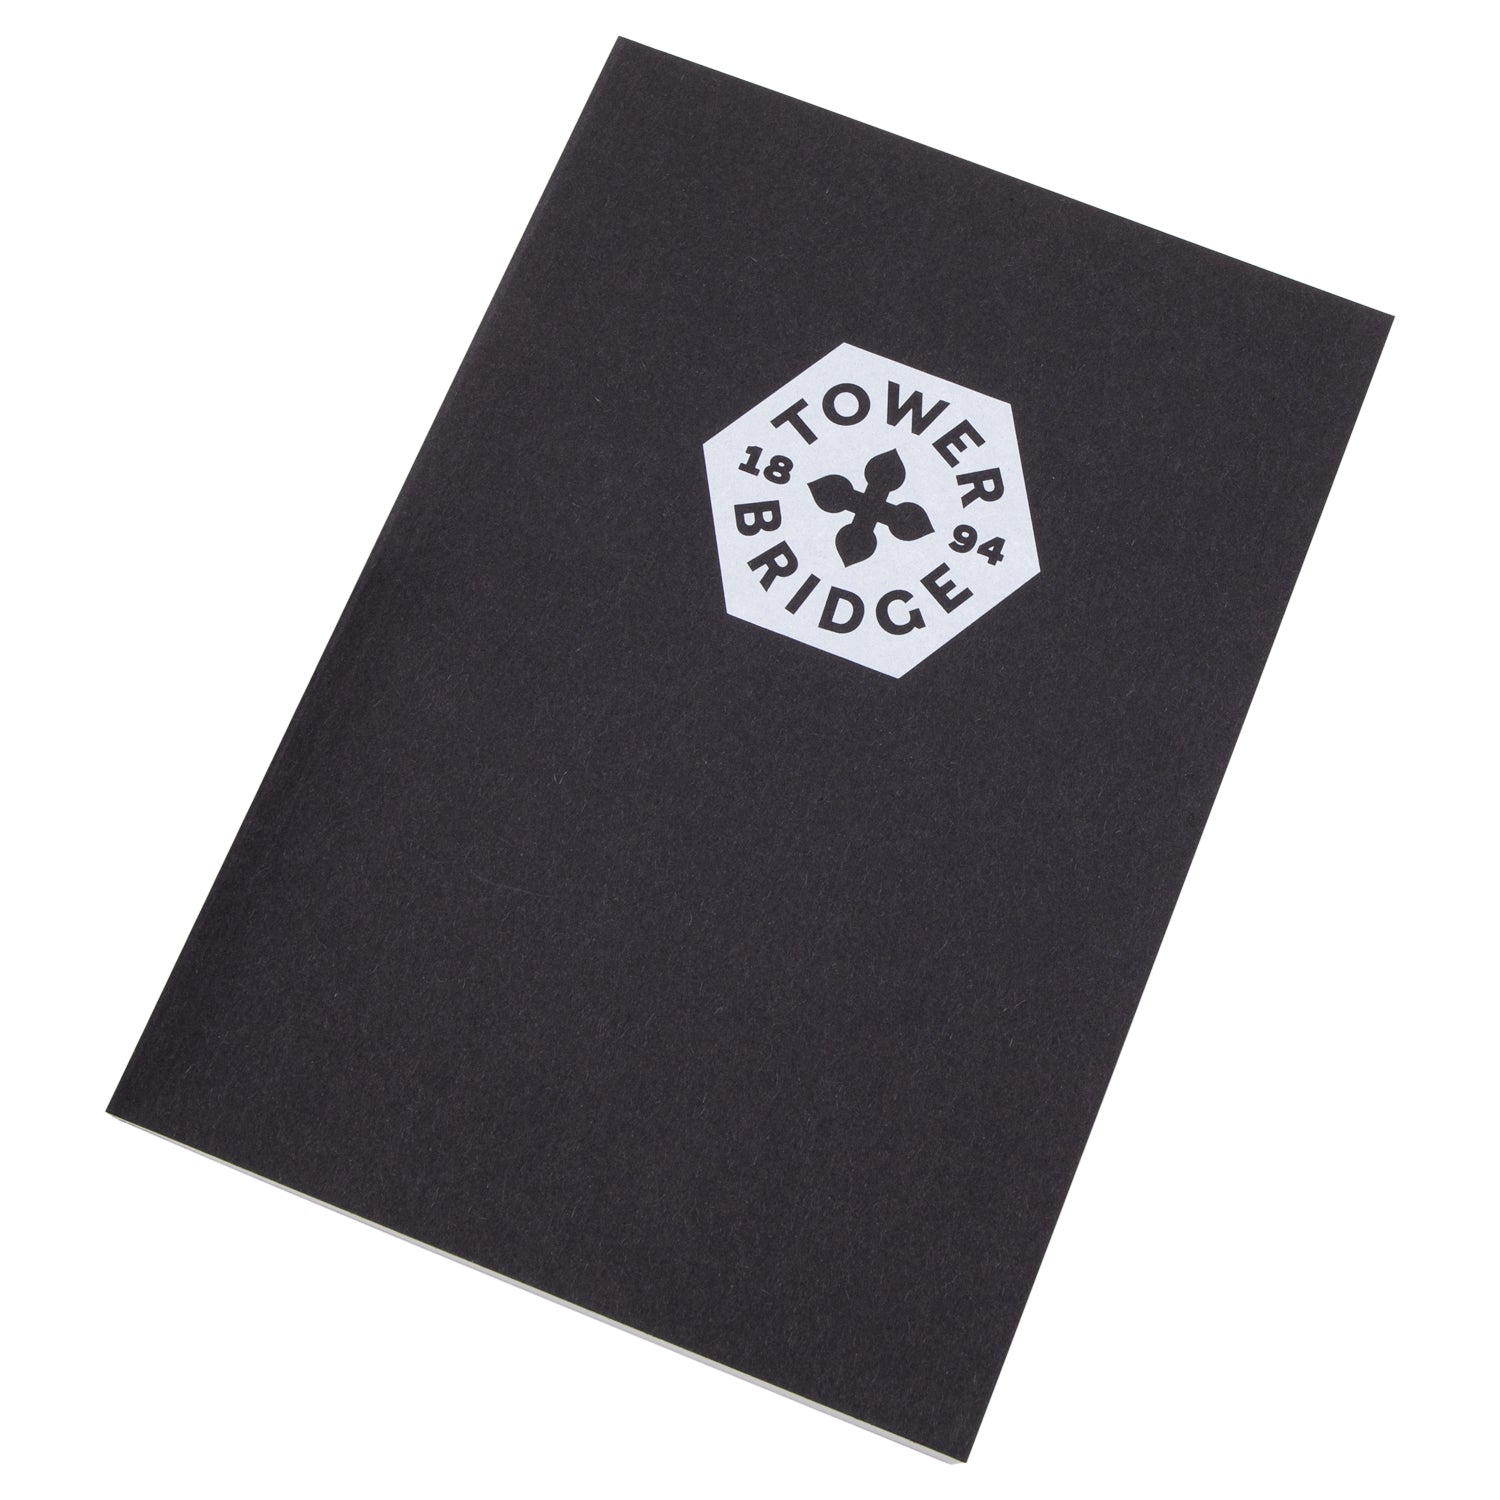 Tower Bridge Eco Recycled Till Receipts Notebook A5 - Black